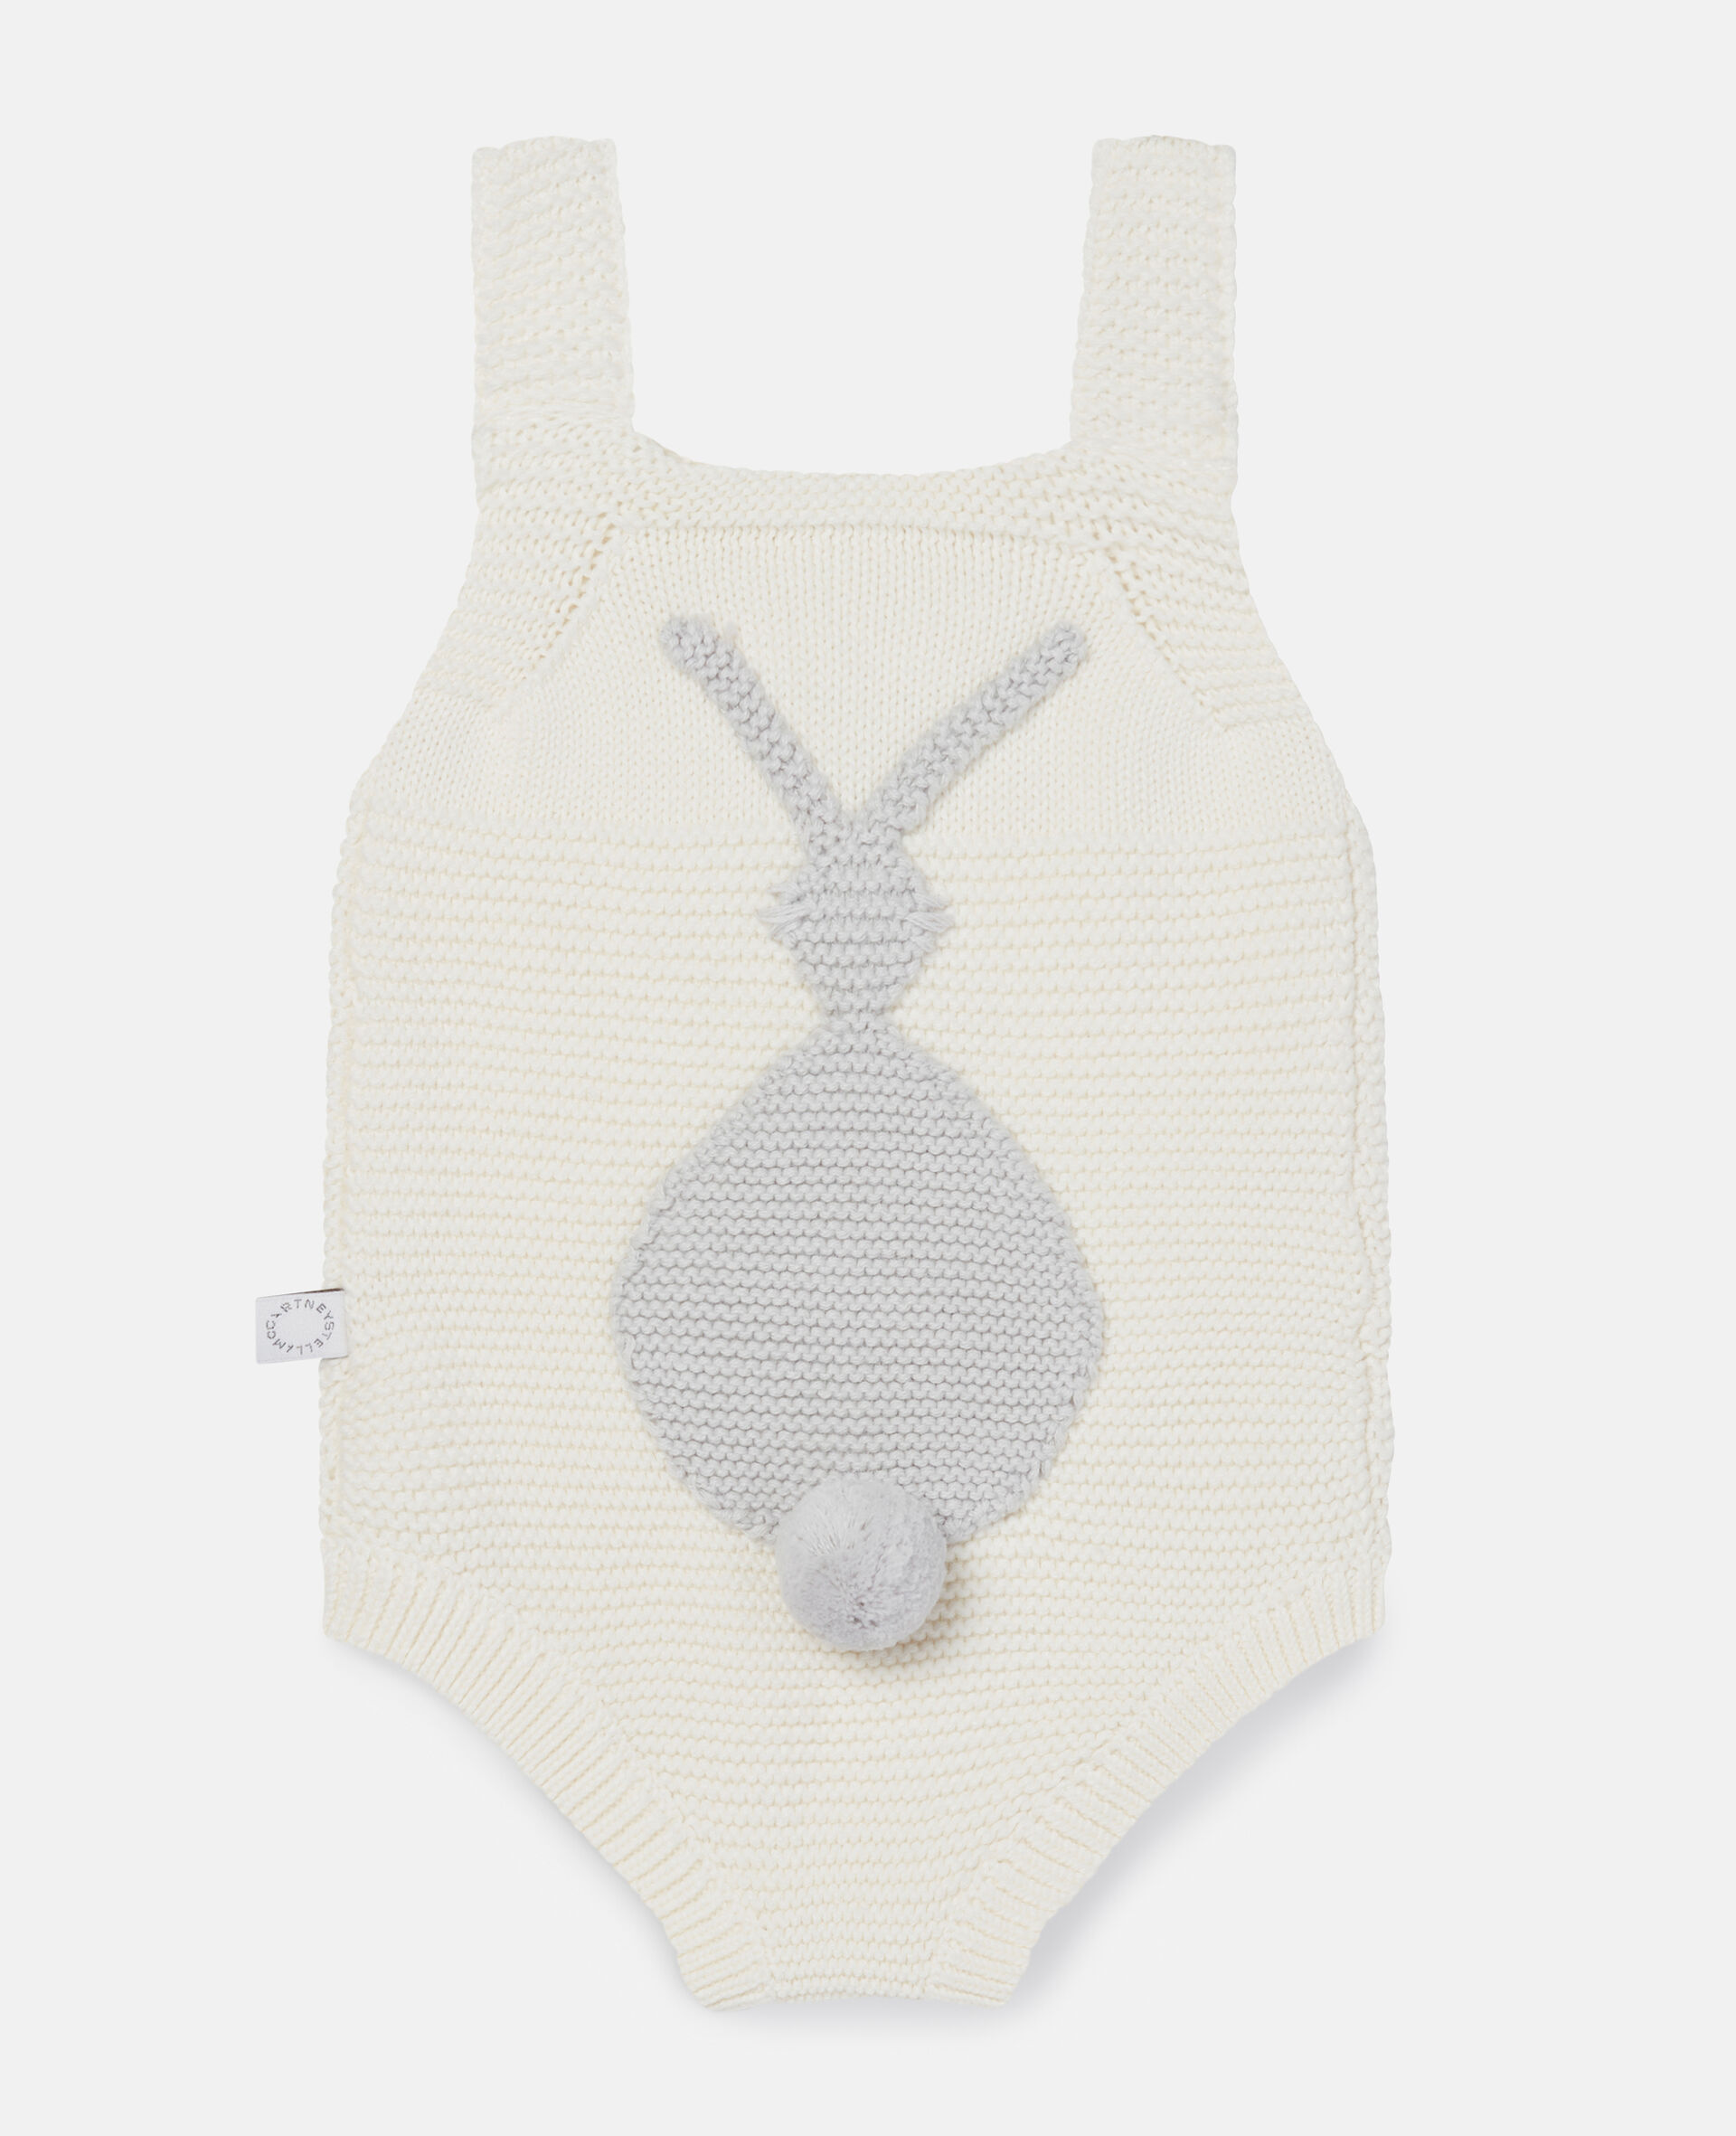 Knit Bunny Tail Bodysuit-White-large image number 3